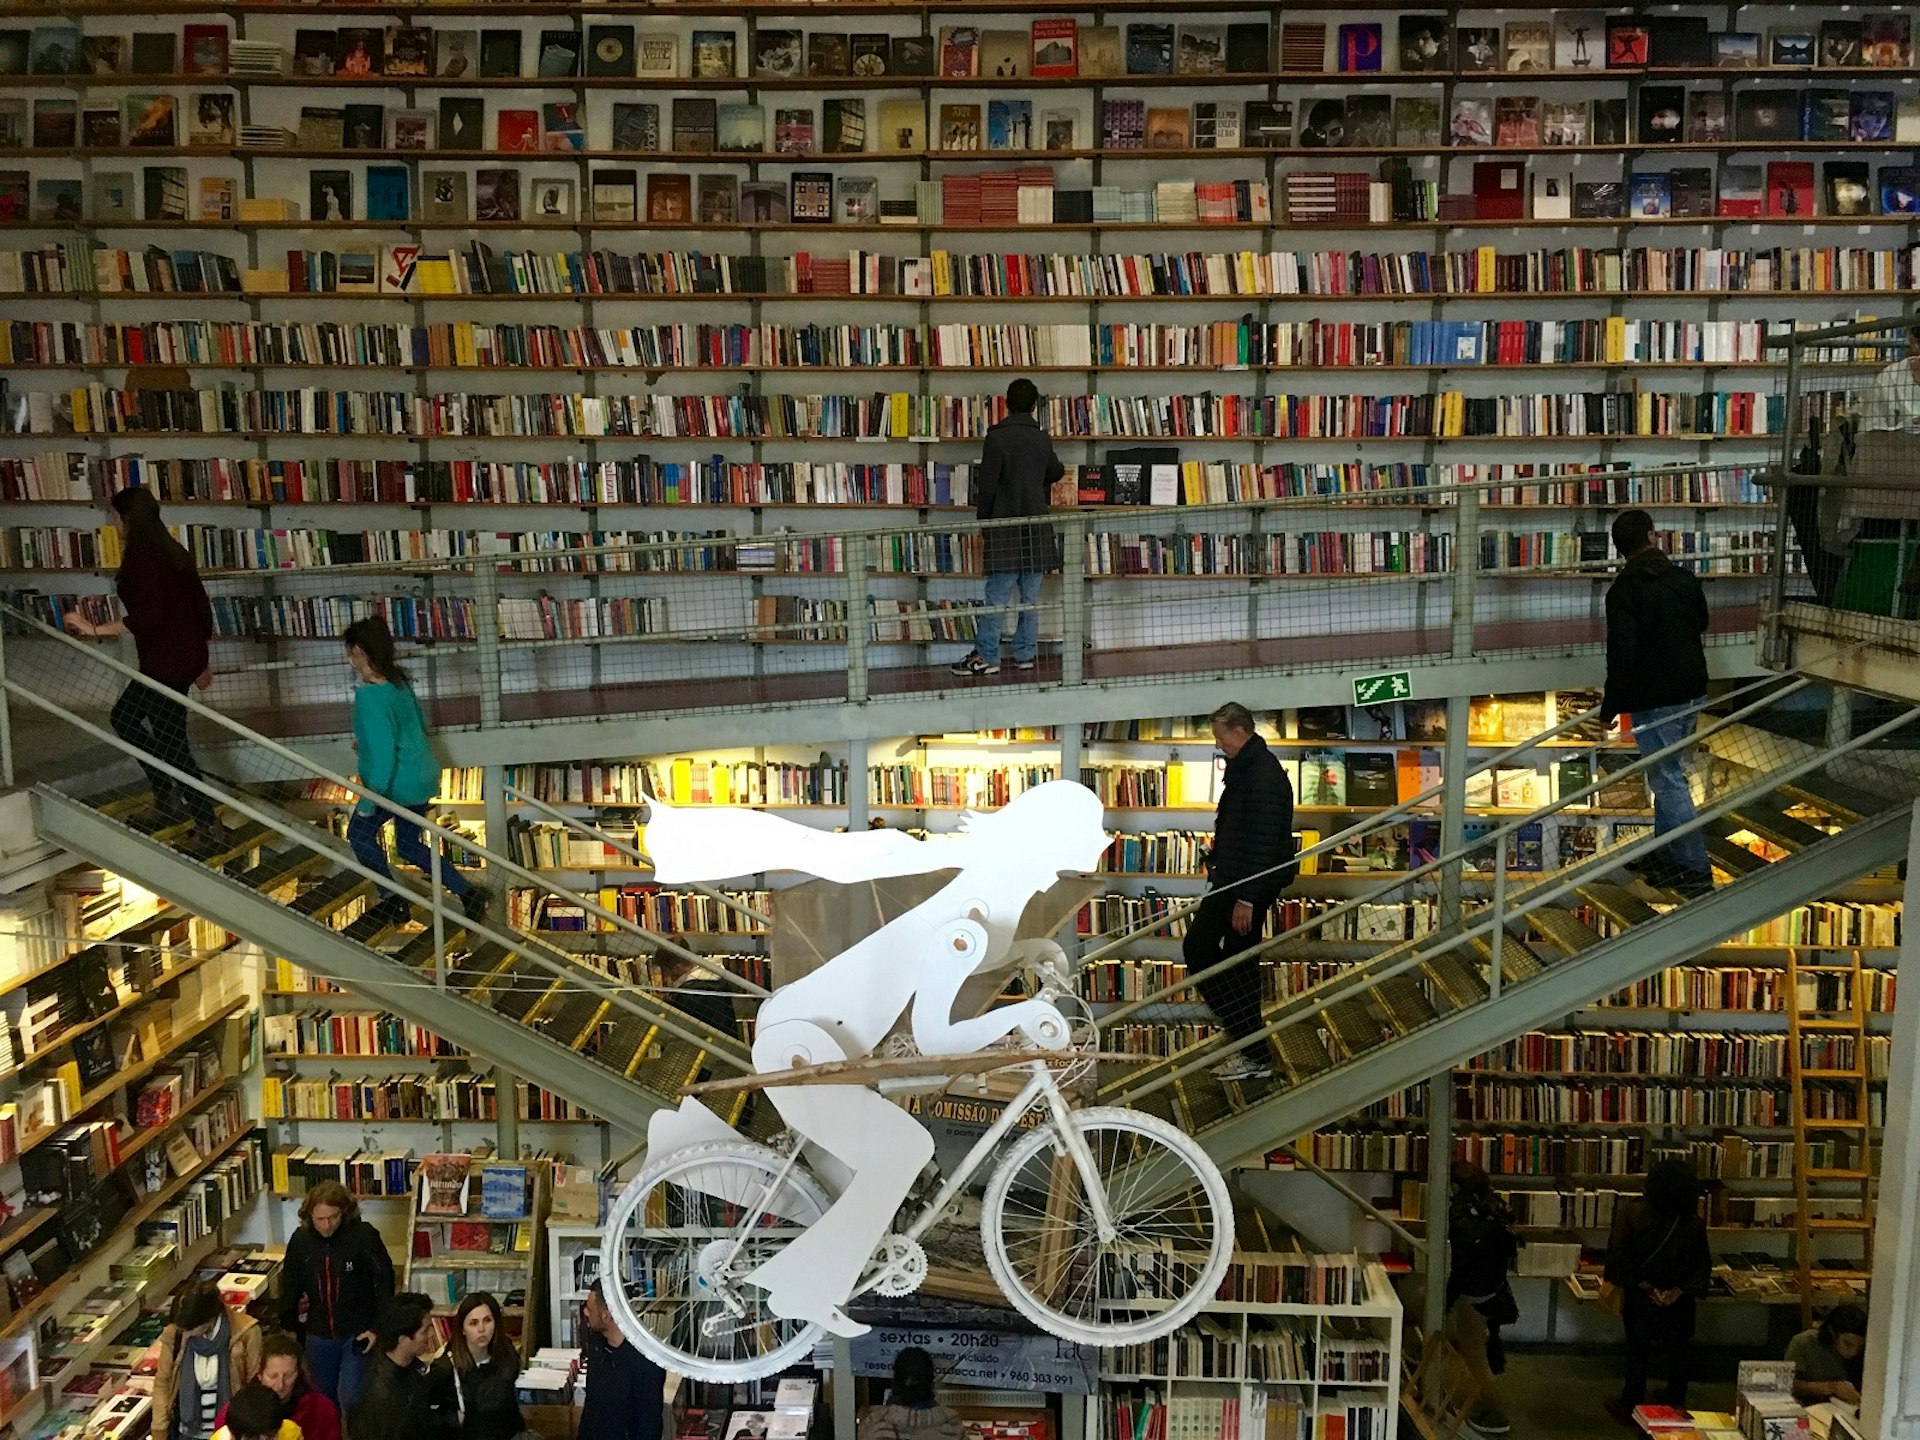 An artwork of a figure on a bicycle is in the foreground. Either side, staircases go up to walkways where the walls are lined with books